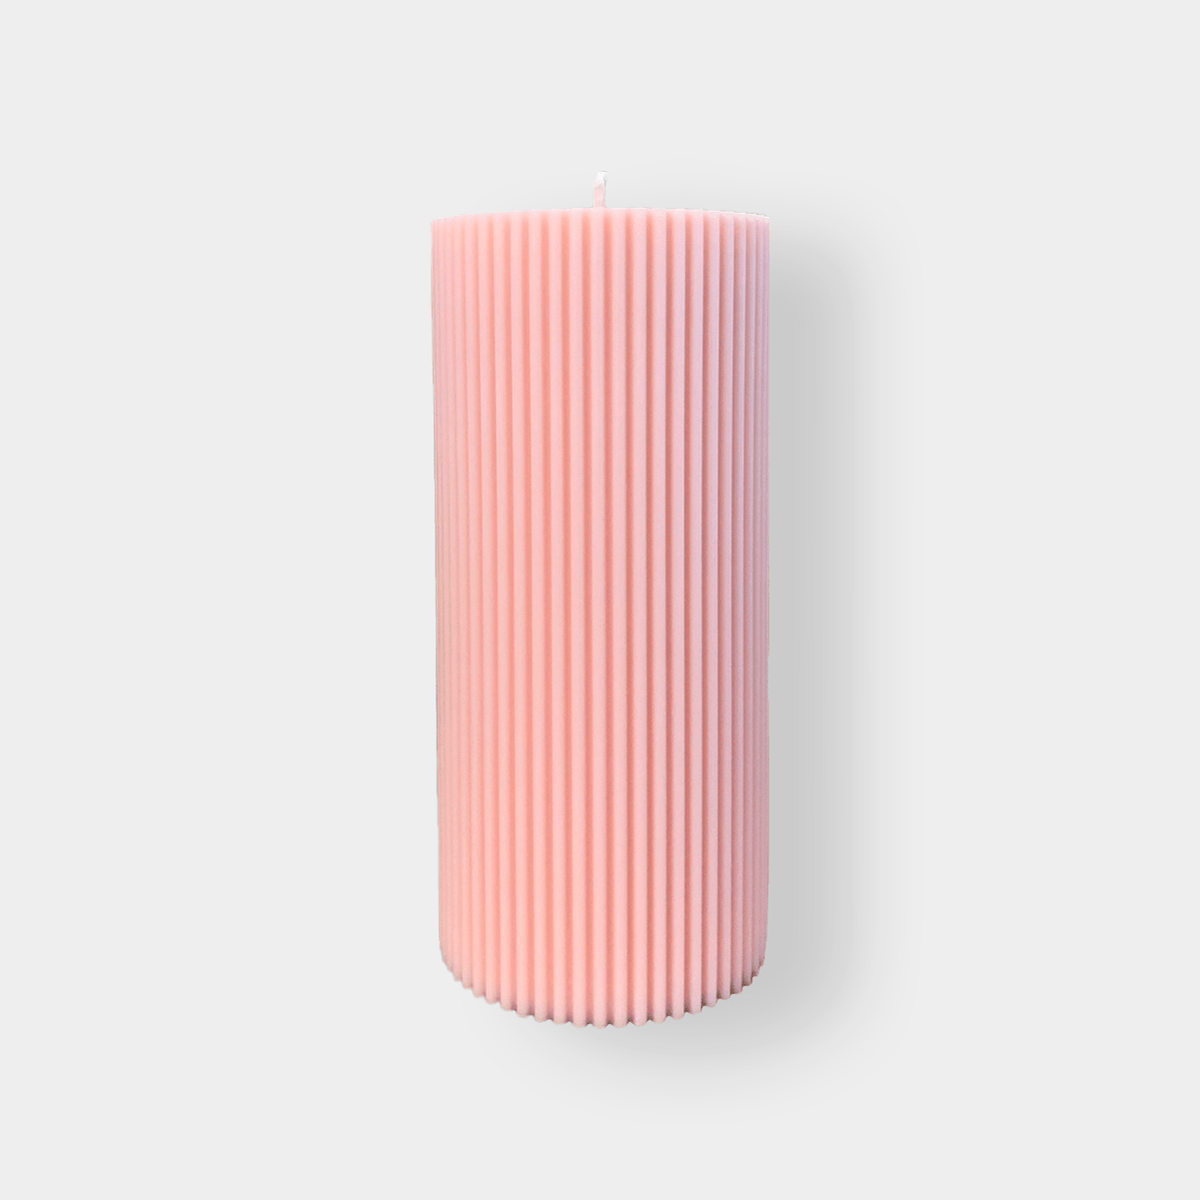 Makes Scents Of It Candles Make Scents of It 15cm Pillar Candle - Blush (7802467909881)